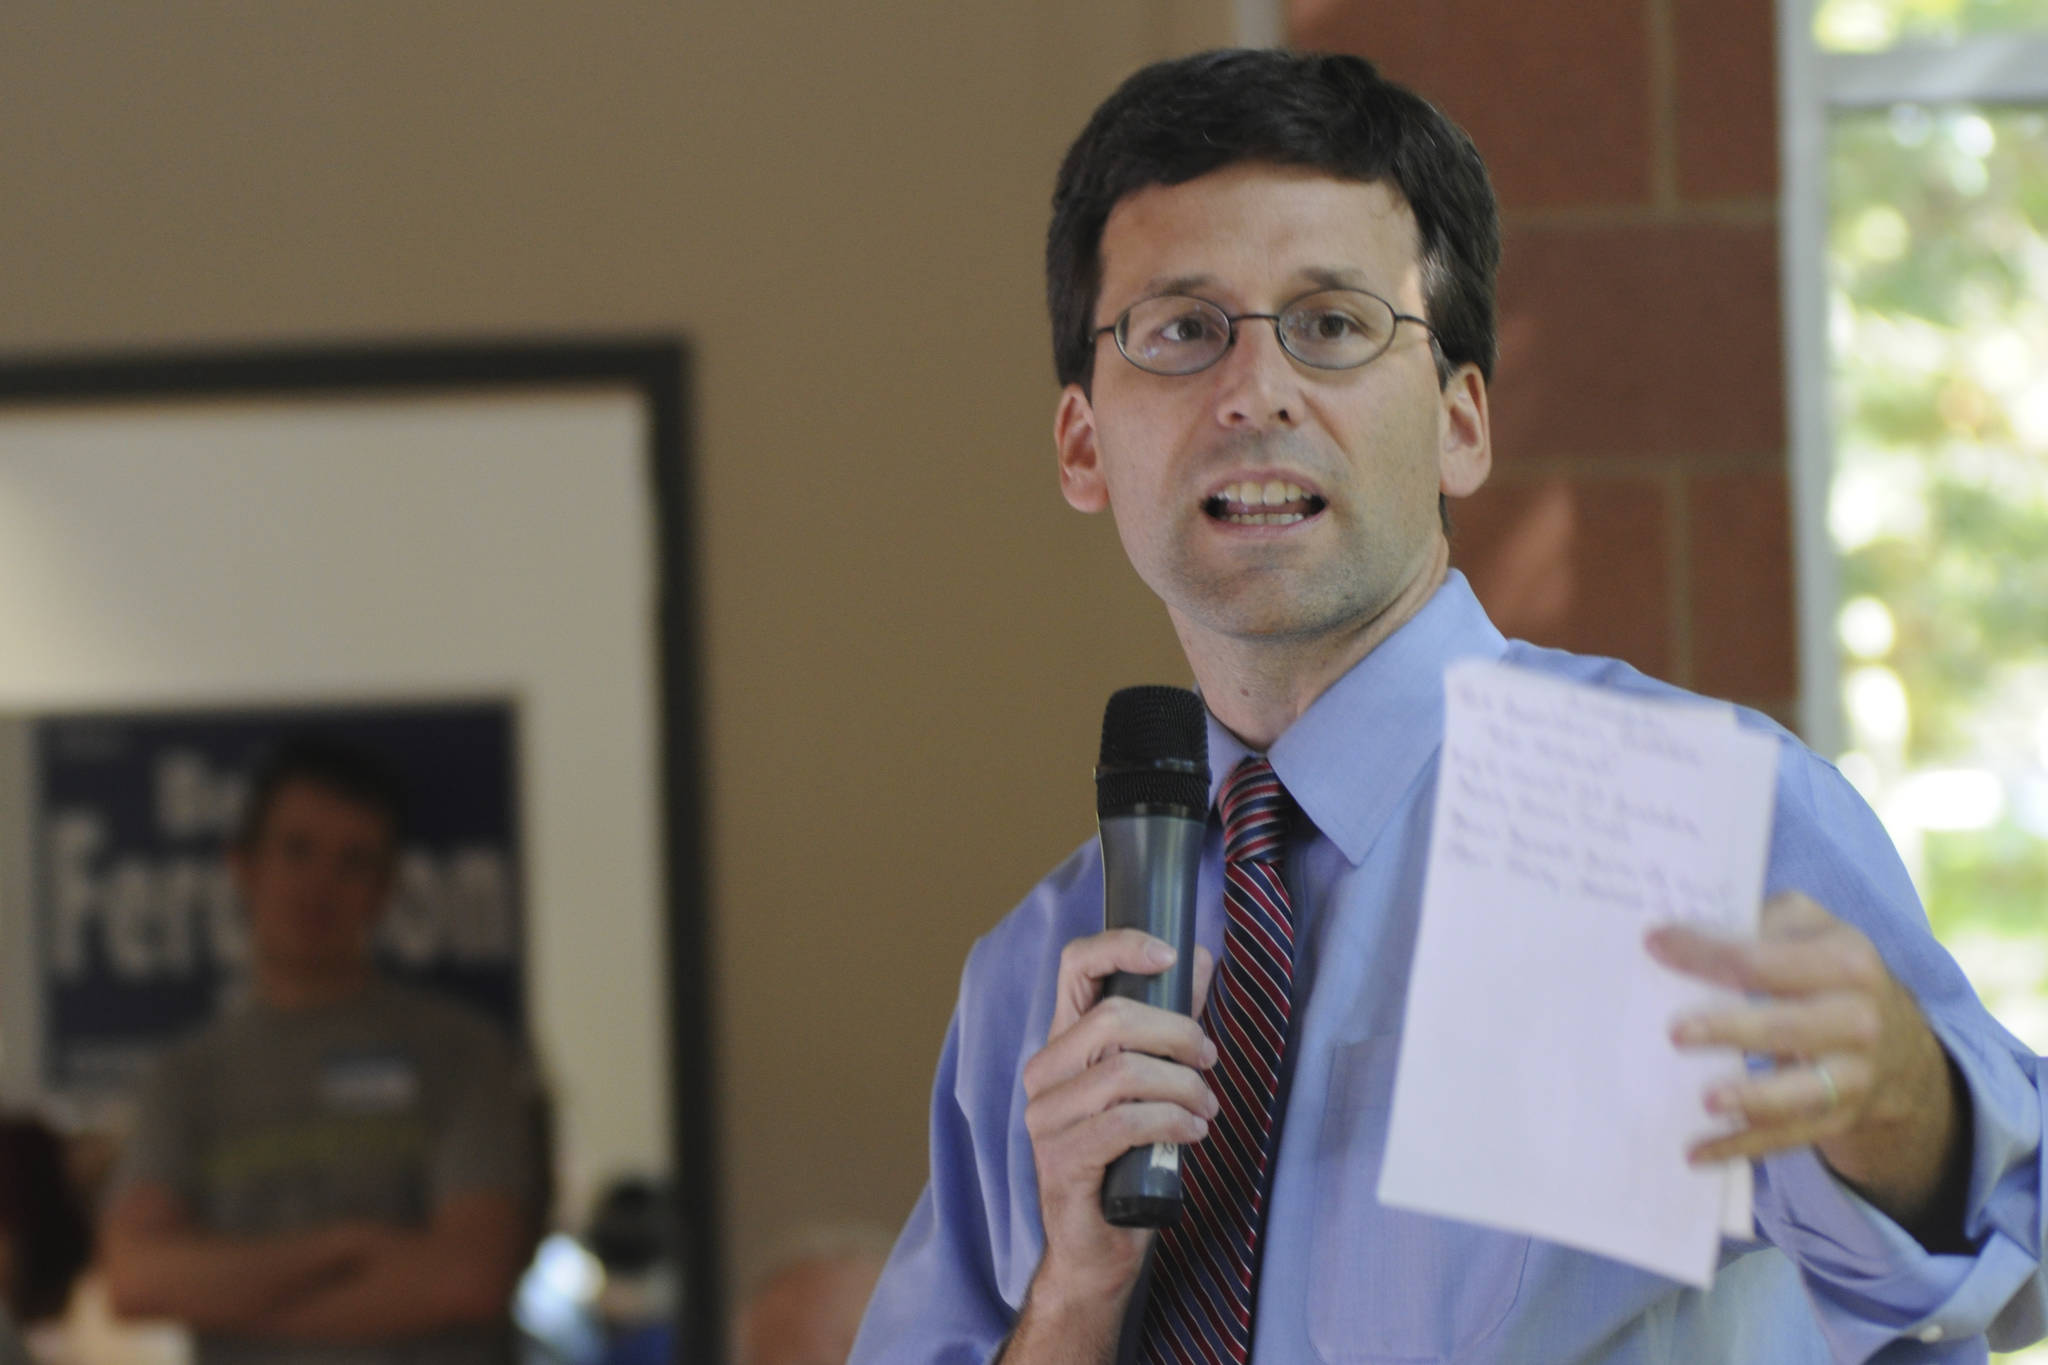 Bob Ferguson is going after controversial Trump administration policies once again. Photo by Joe Mabel/Wikimedia Commons